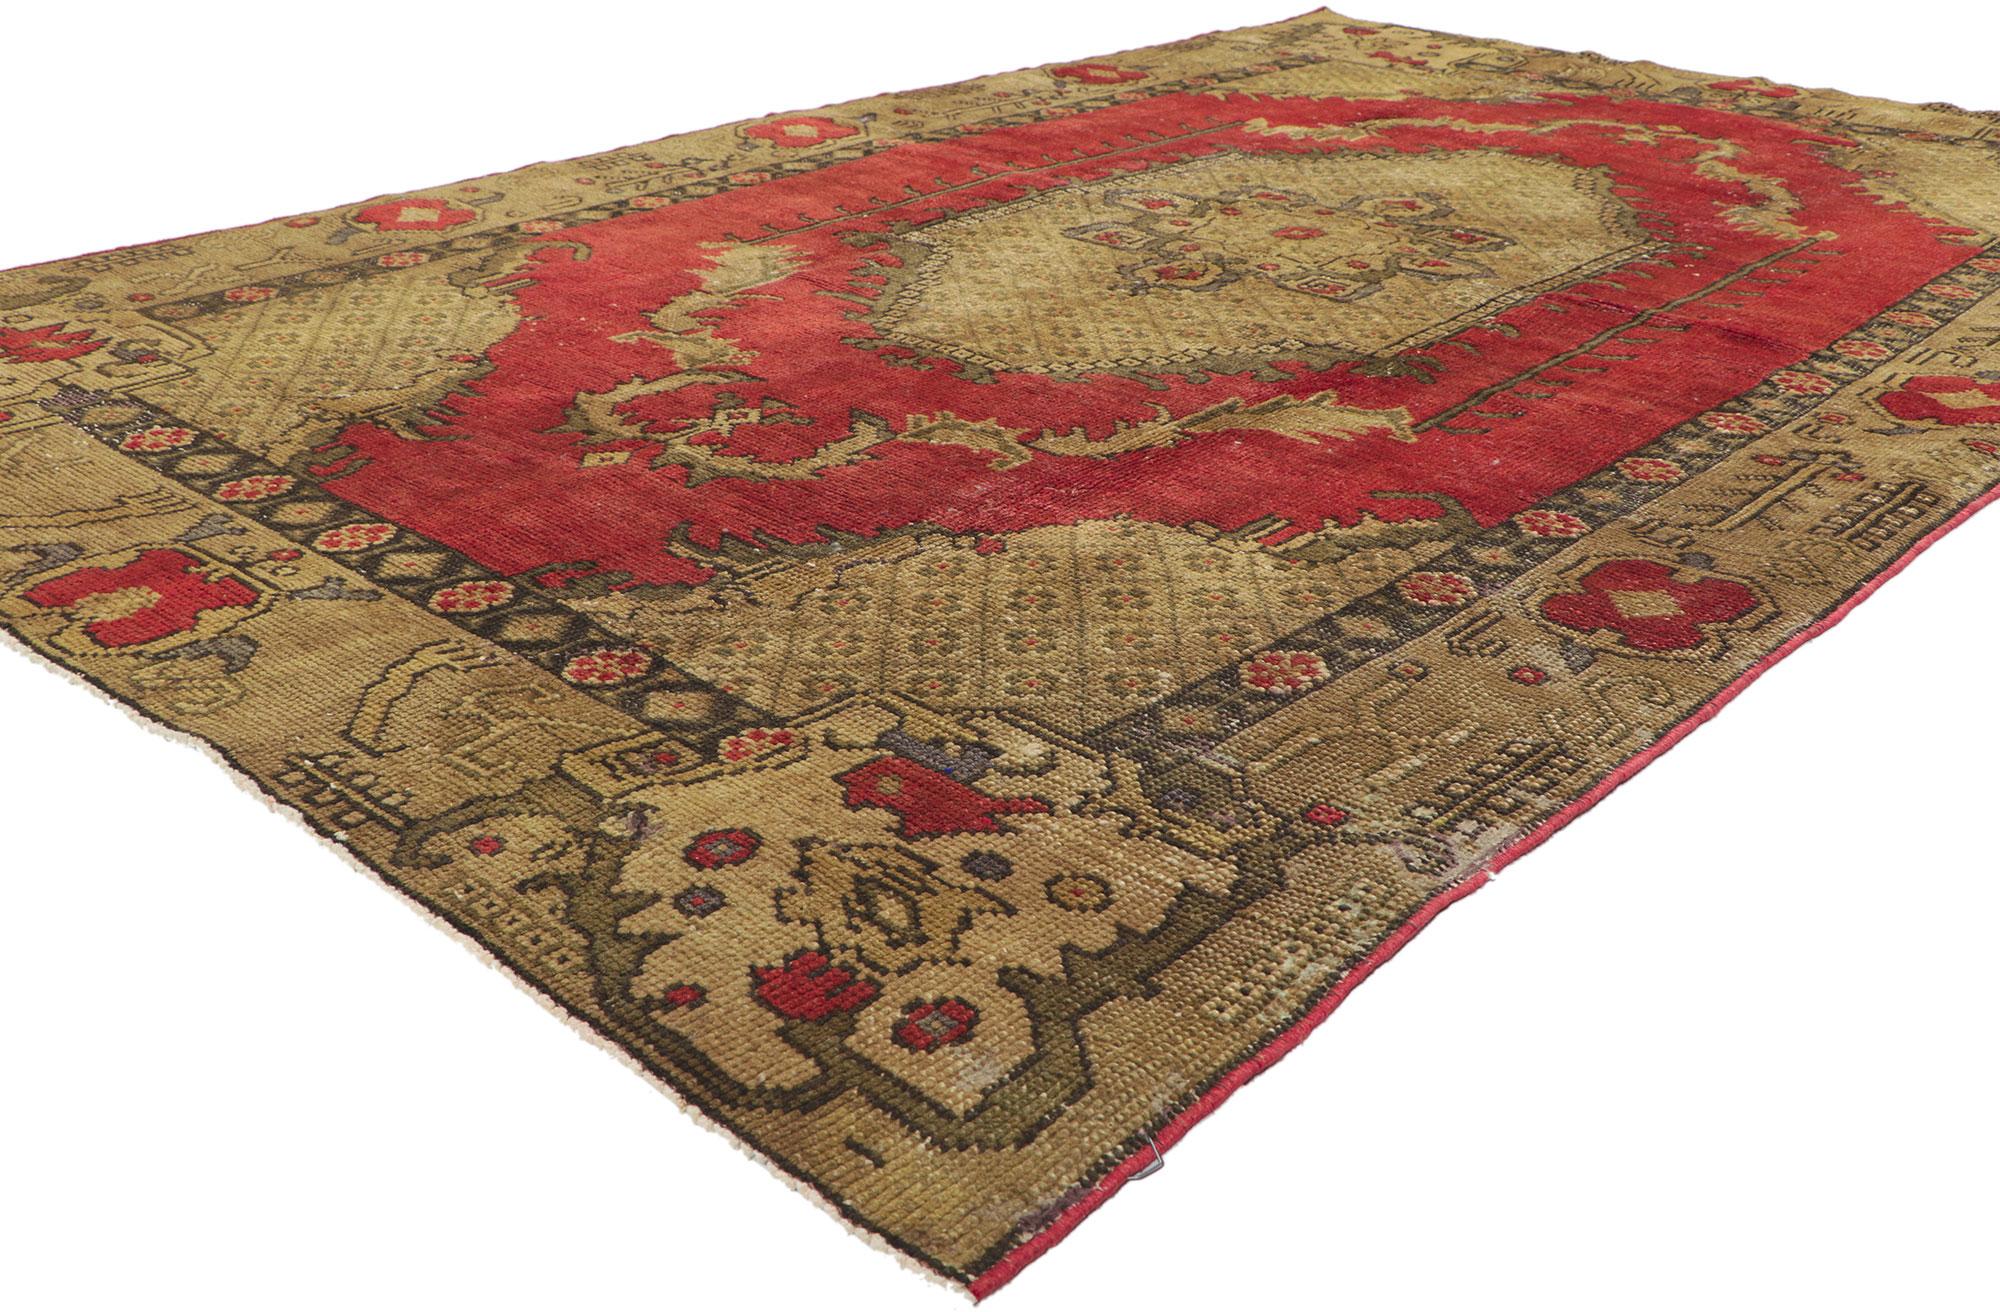 51810 vintage Turkish oushak rug, 05'02 x 08'08.
Regal and sumptuous with incredible detail and texture, this hand knotted wool vintage Turkish Oushak rug is a captivating vision of woven beauty. The medallion design and traditional colorway woven